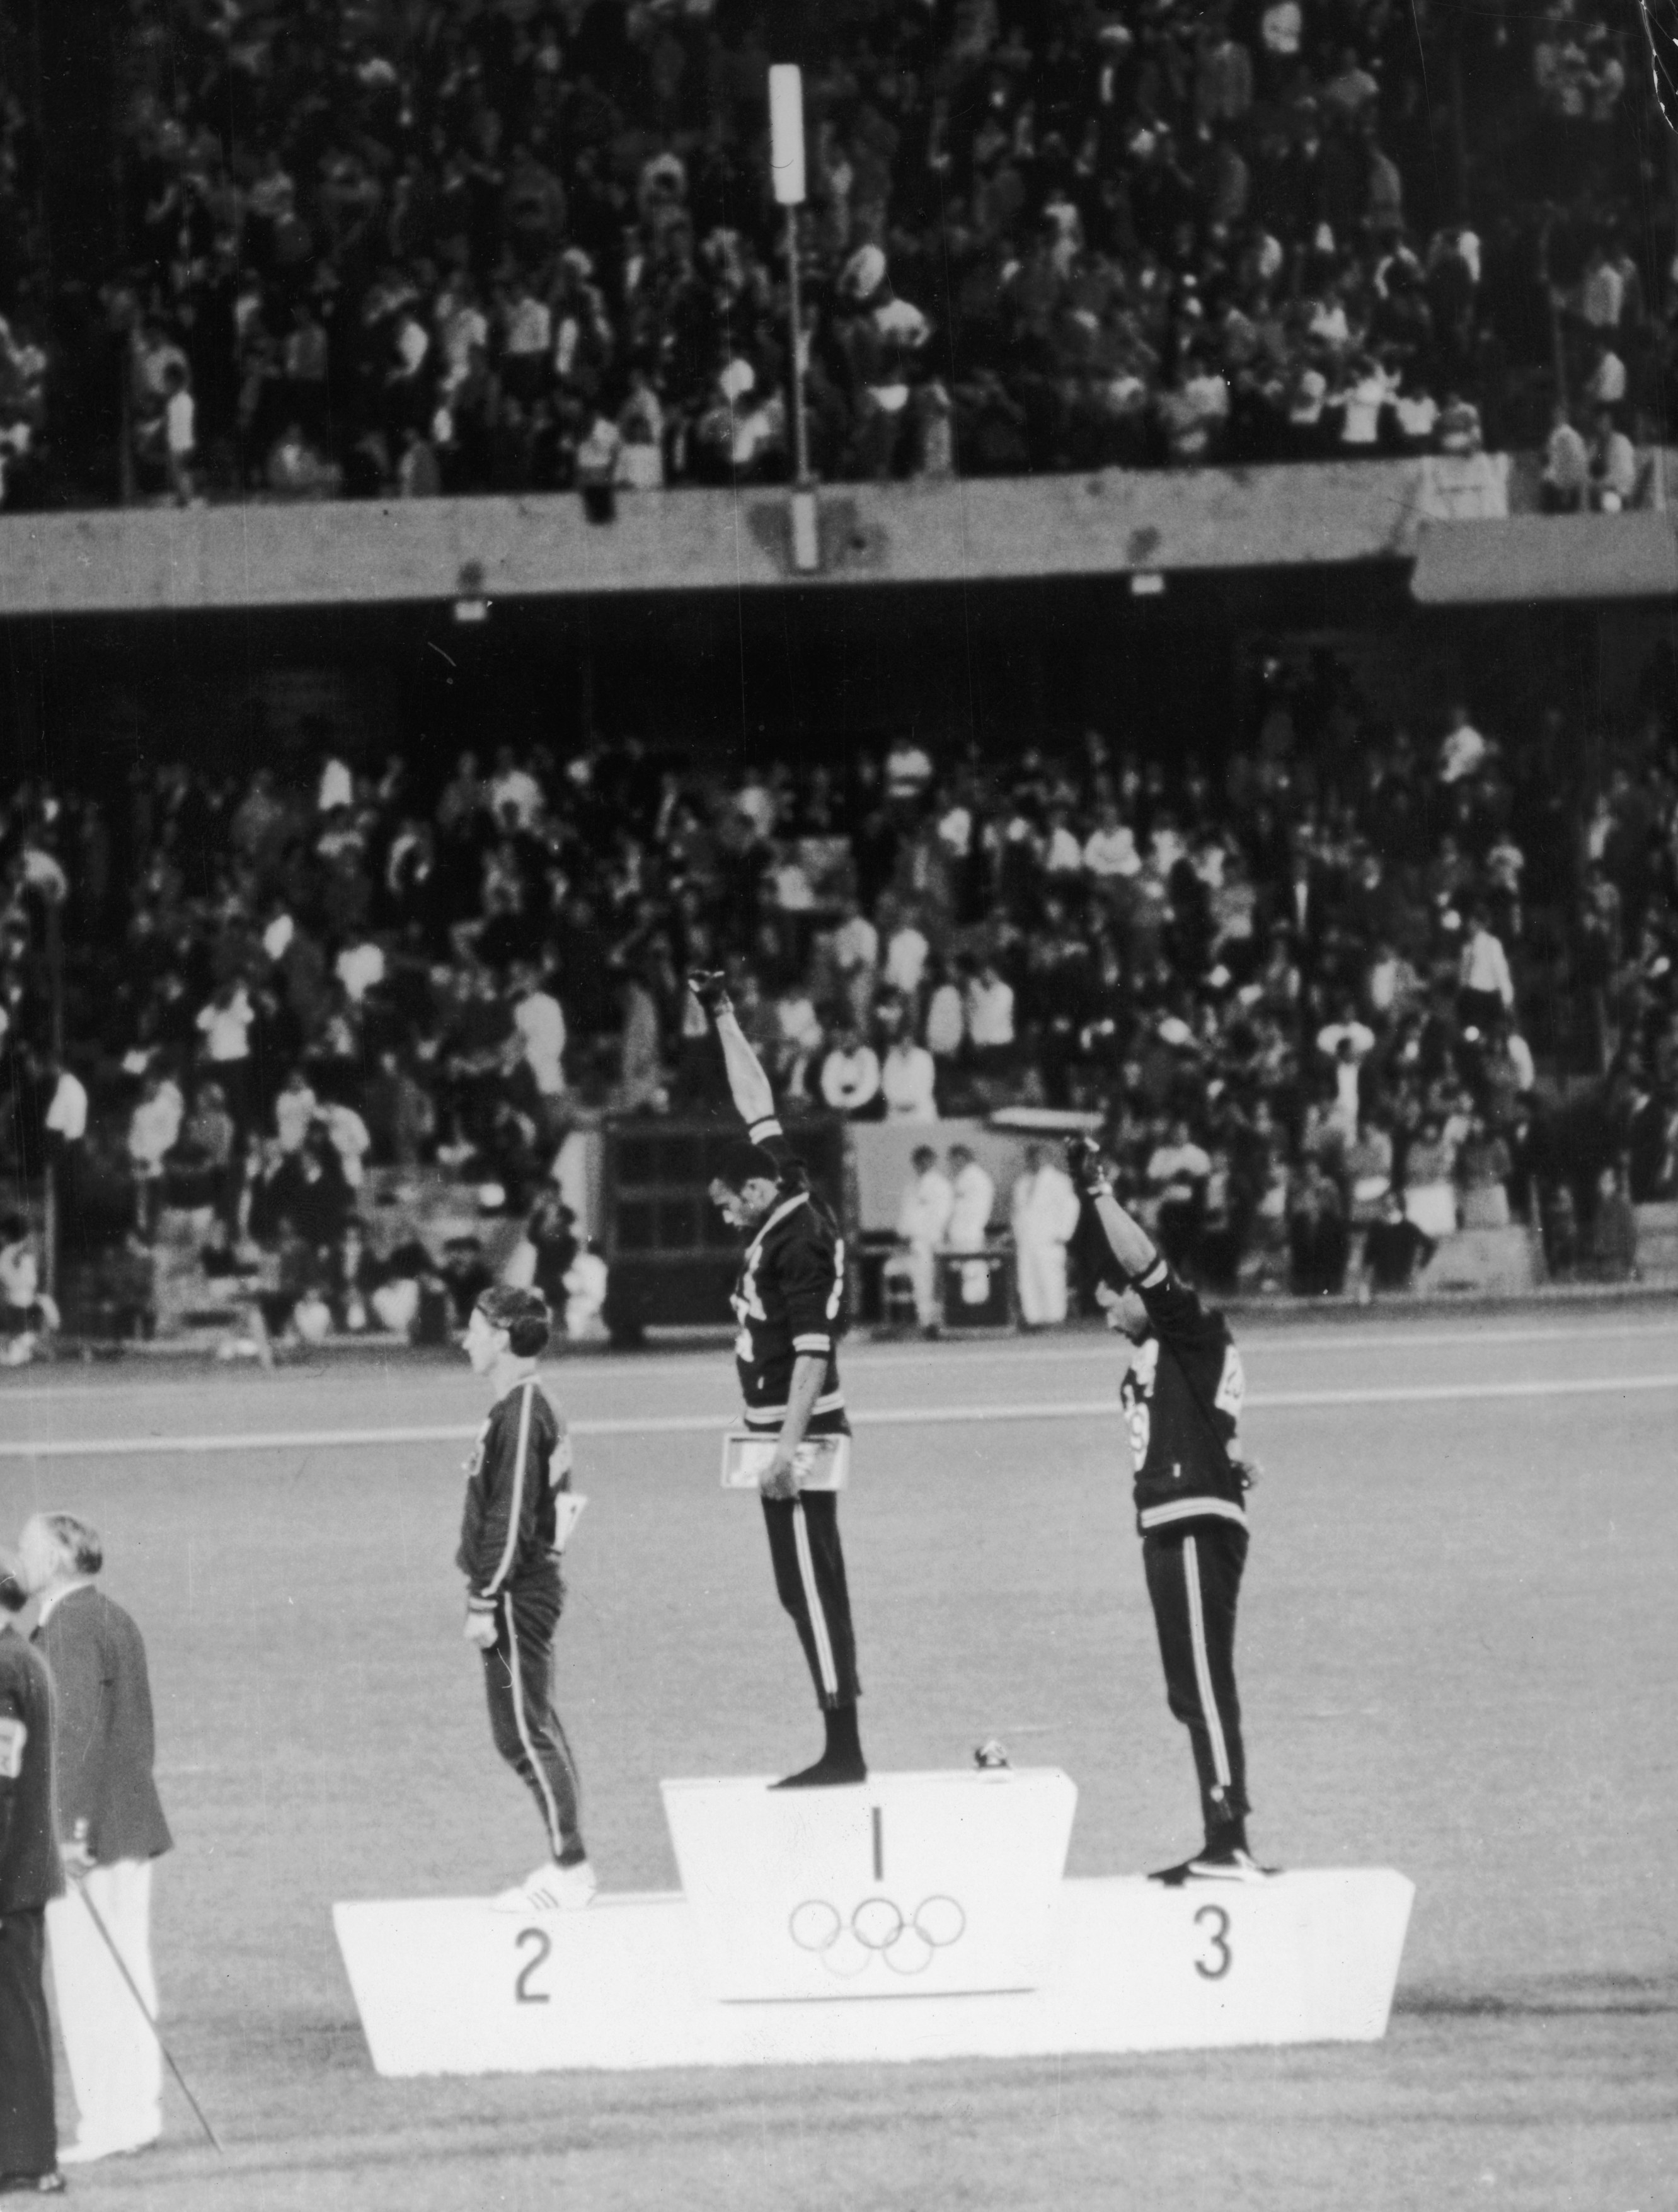 Tommie Smith and John Carlos raise their fist in the air while standing on the podium